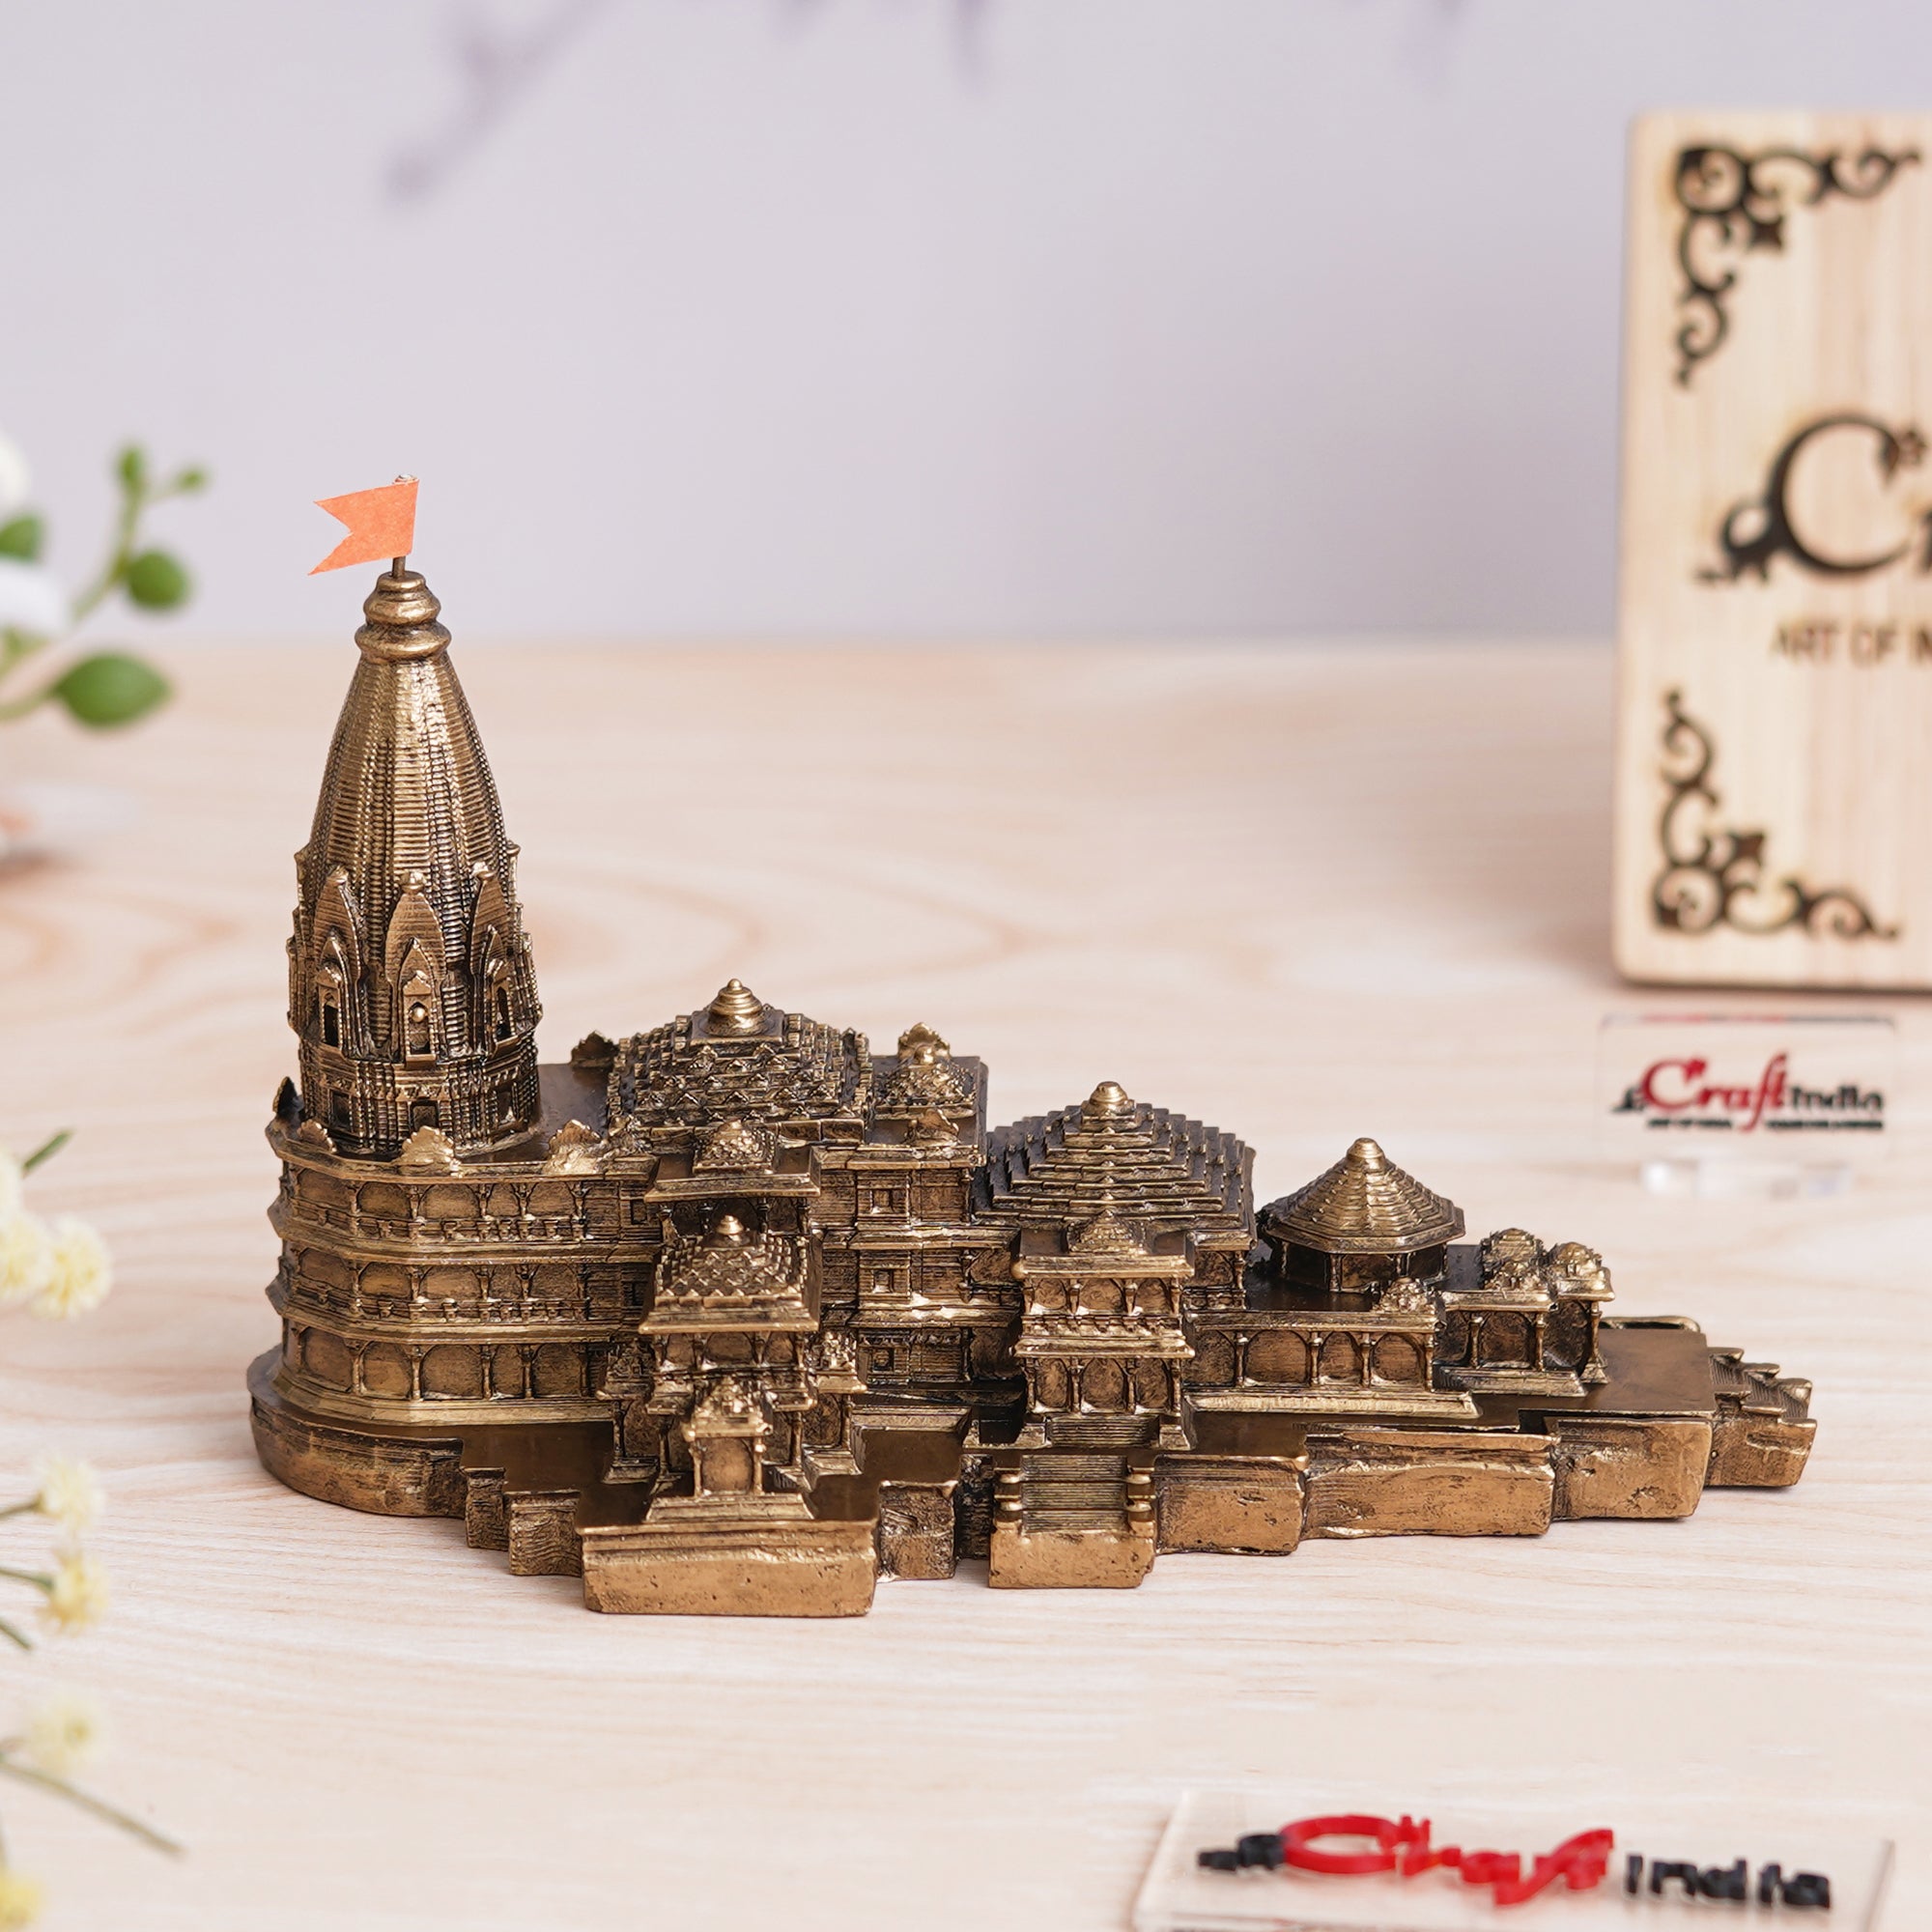 eCraftIndia Ram Mandir Ayodhya Model Authentic Design Temple - Perfect for Home Decor, and Spiritual Gifting (Golden)